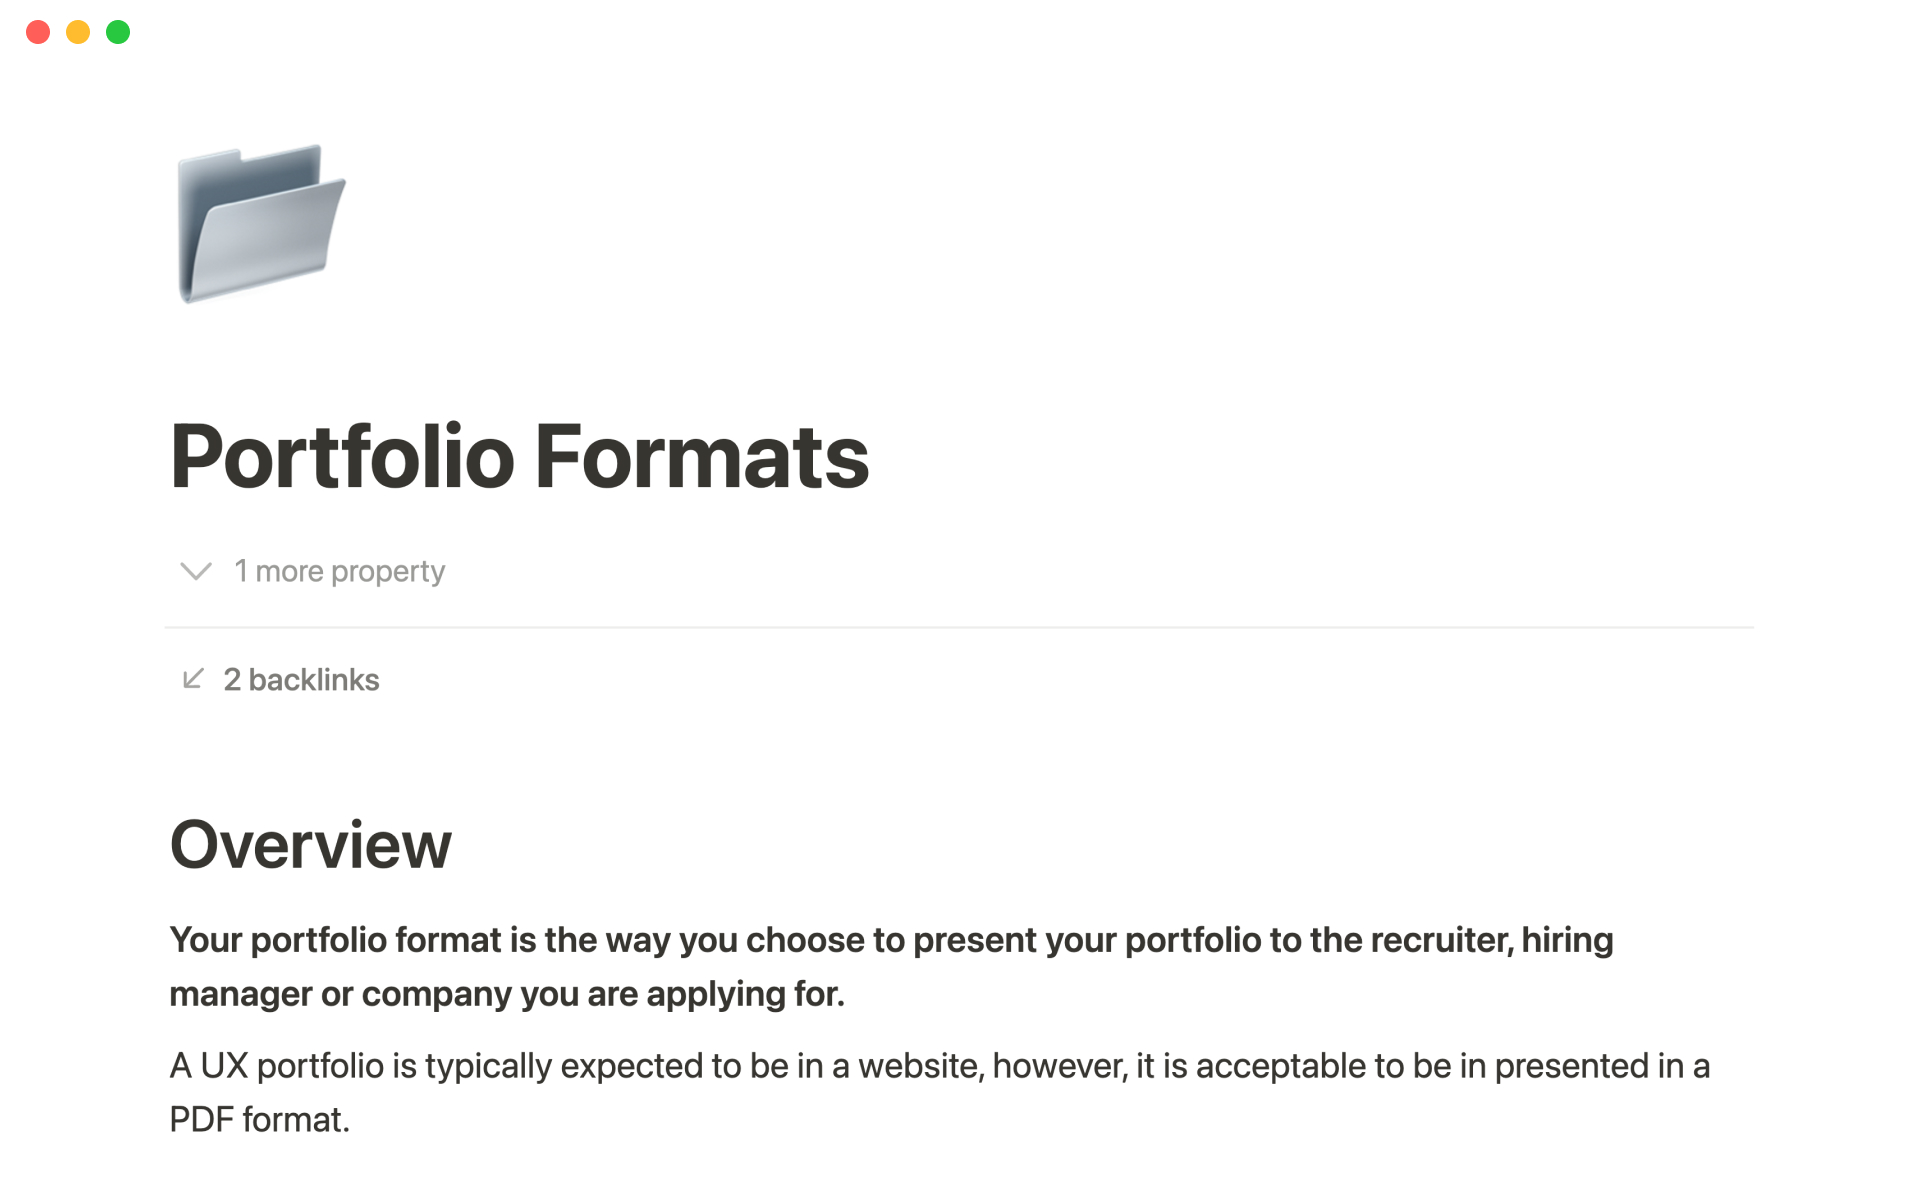 An all-in-one toolbox for UX interviews, creating portfolios, and more.